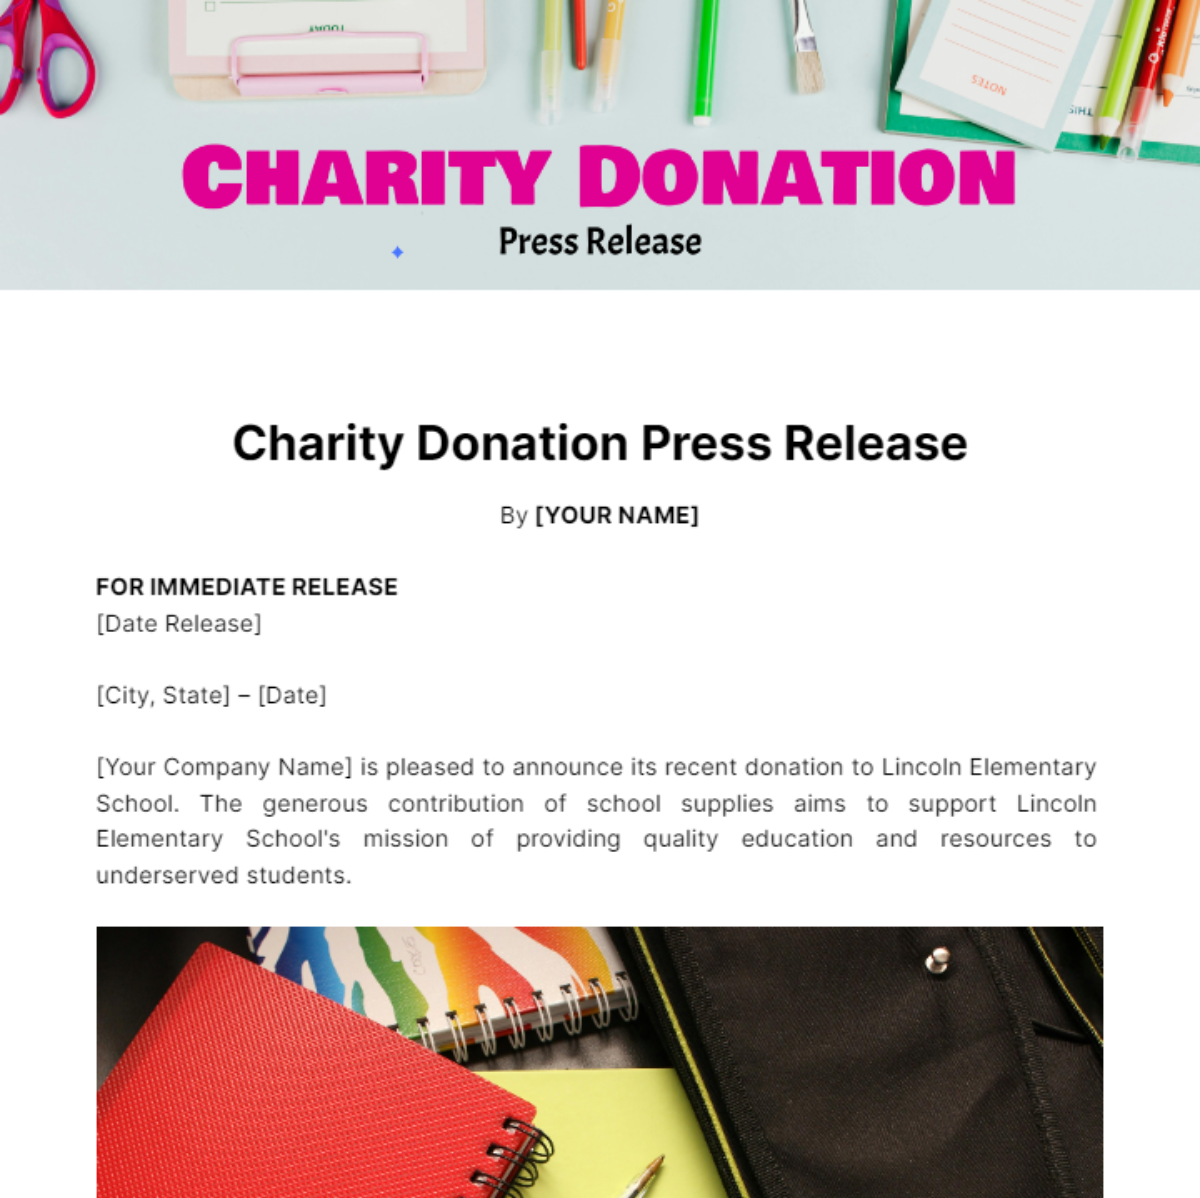 Charity Donation Press Release Template